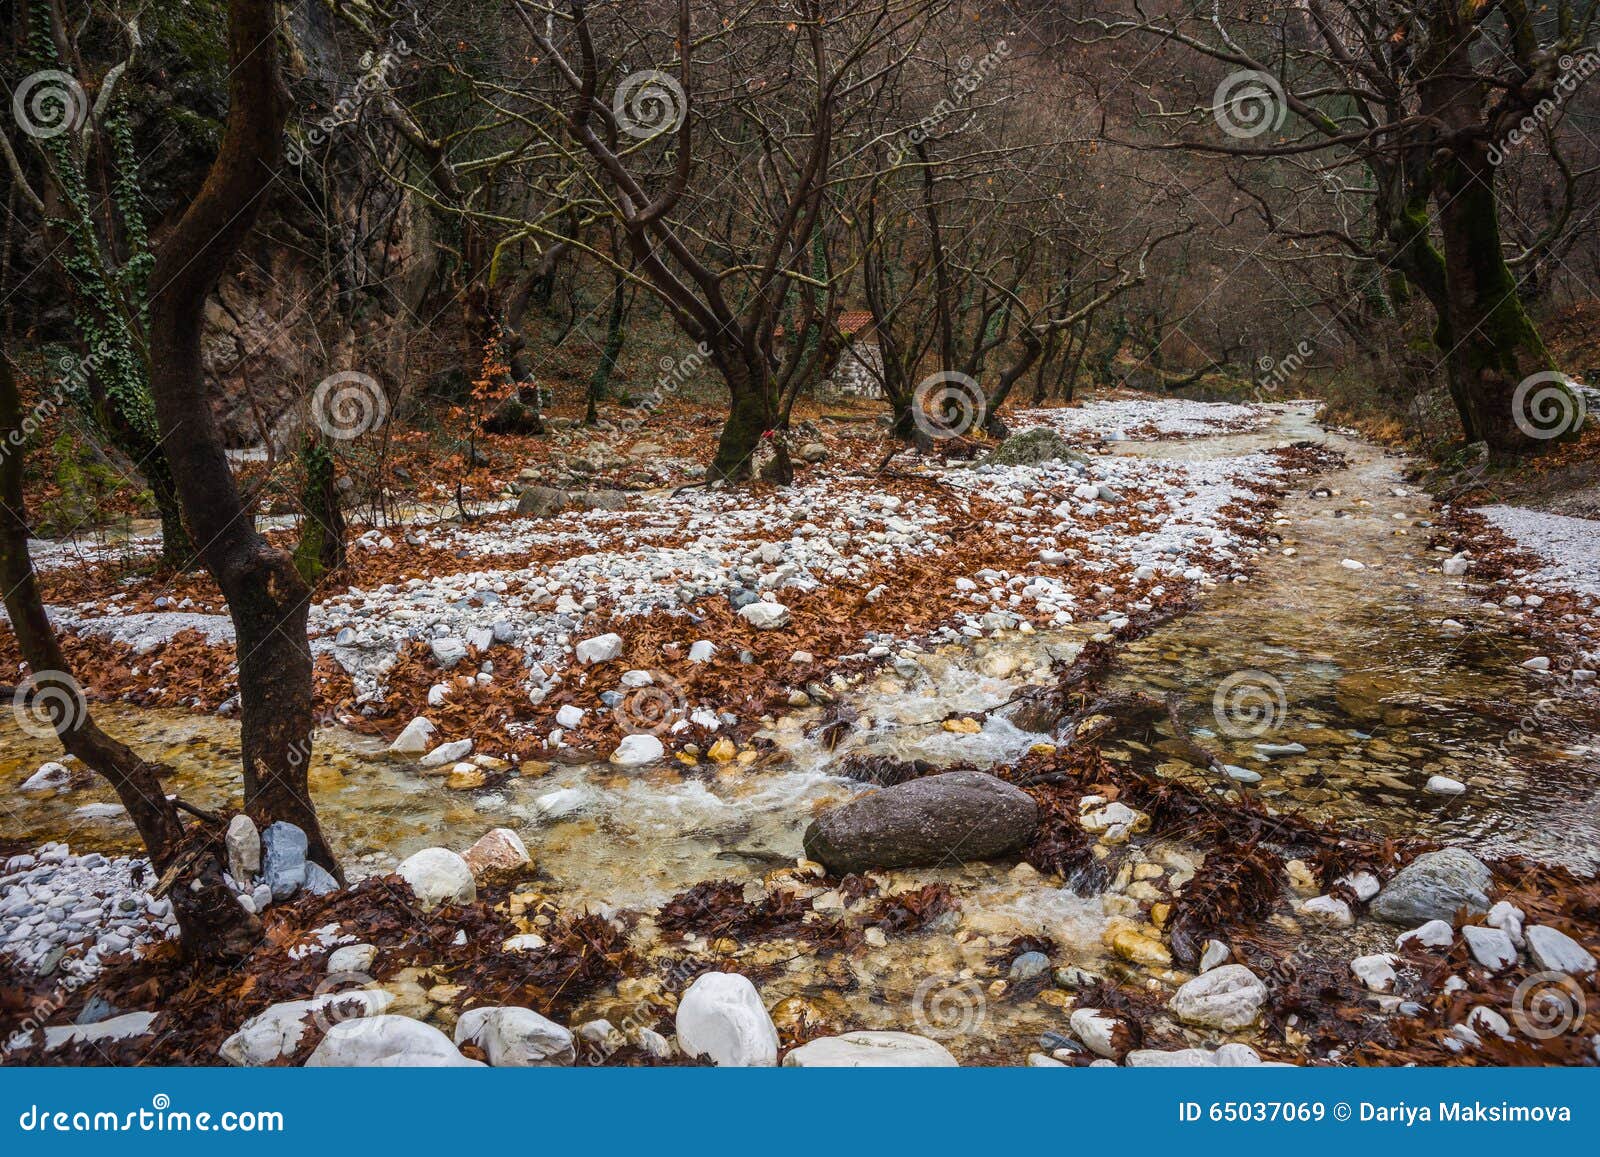 river with colored stones and hot springs in loutra pozar, north